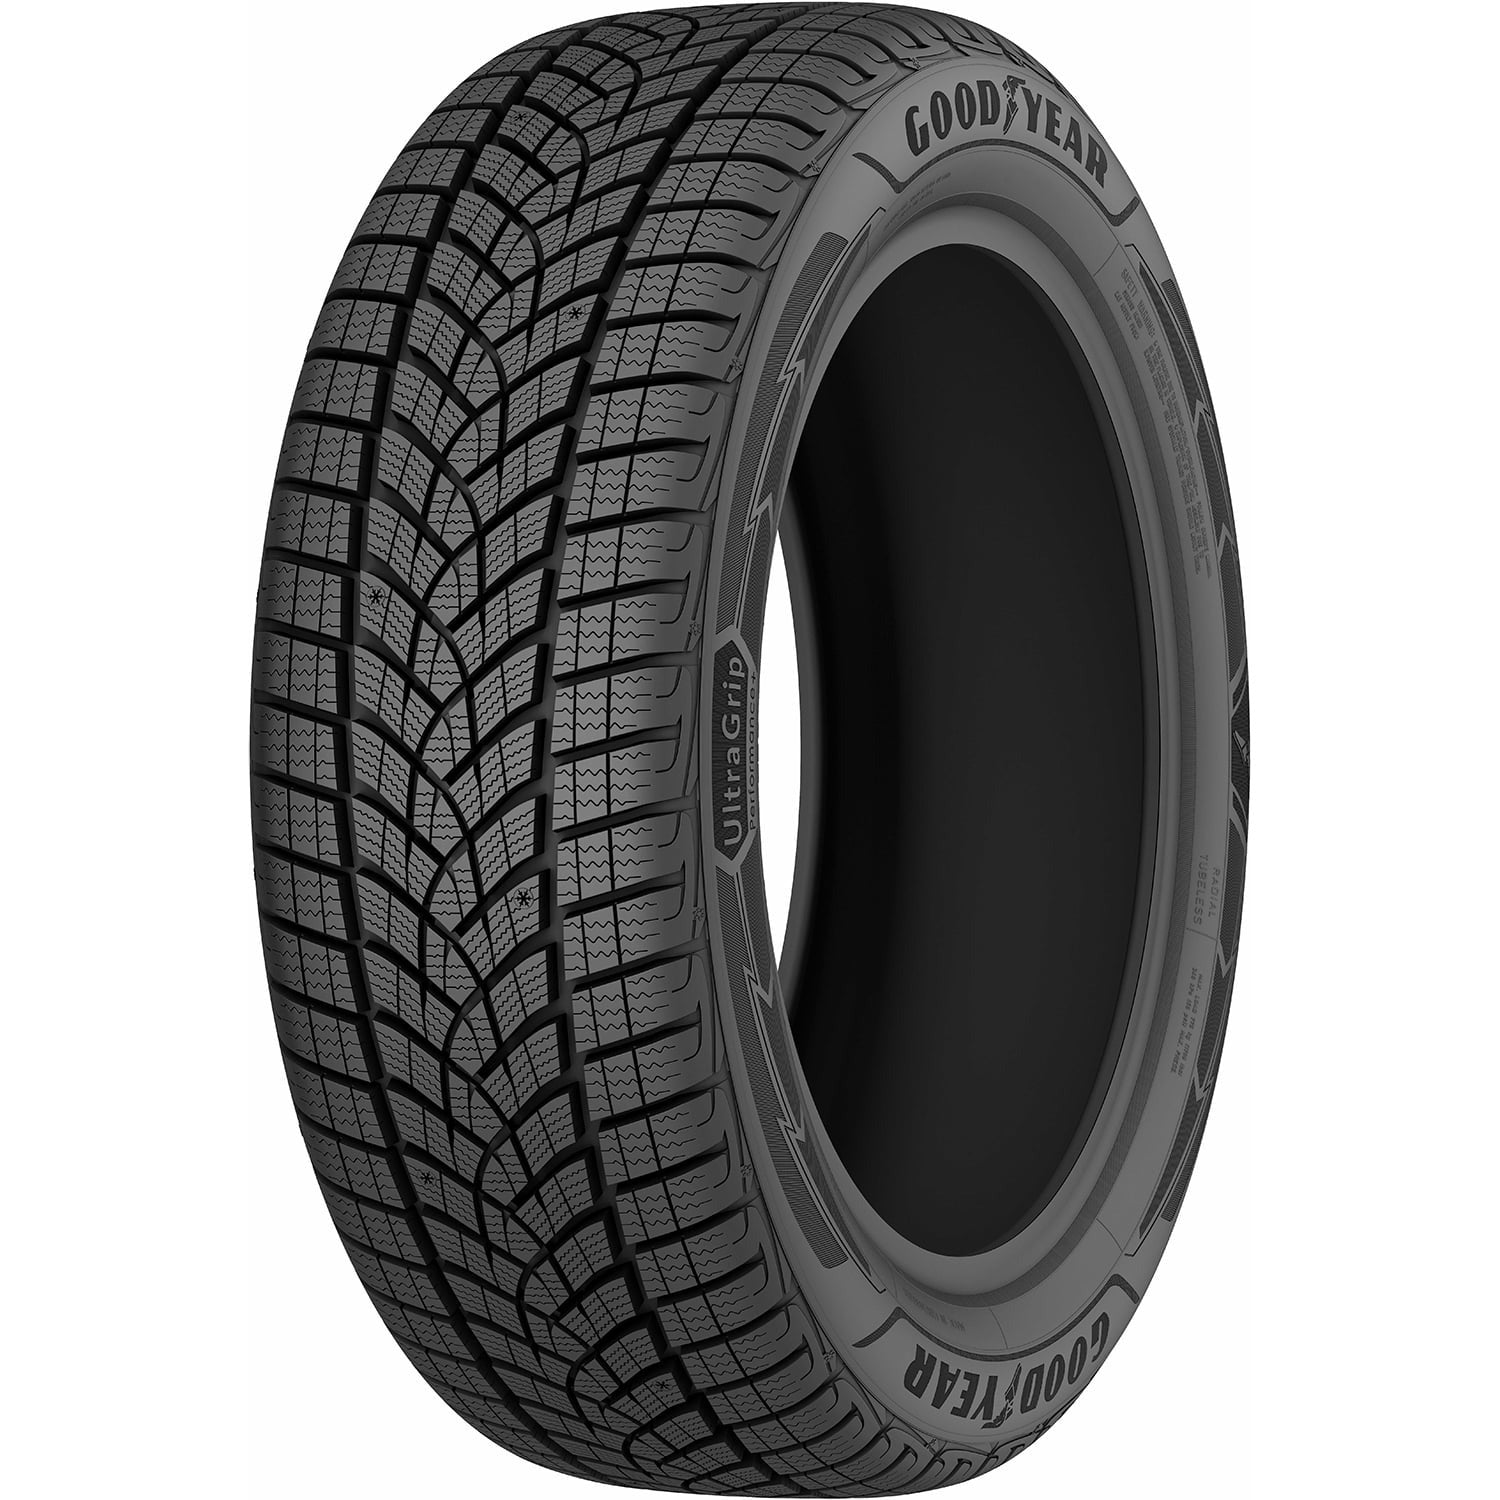 Goodyear Ultra Grip Performance + SUV | Winter Tire - Mazda Shop | Genuine  Mazda Parts and Accessories Online